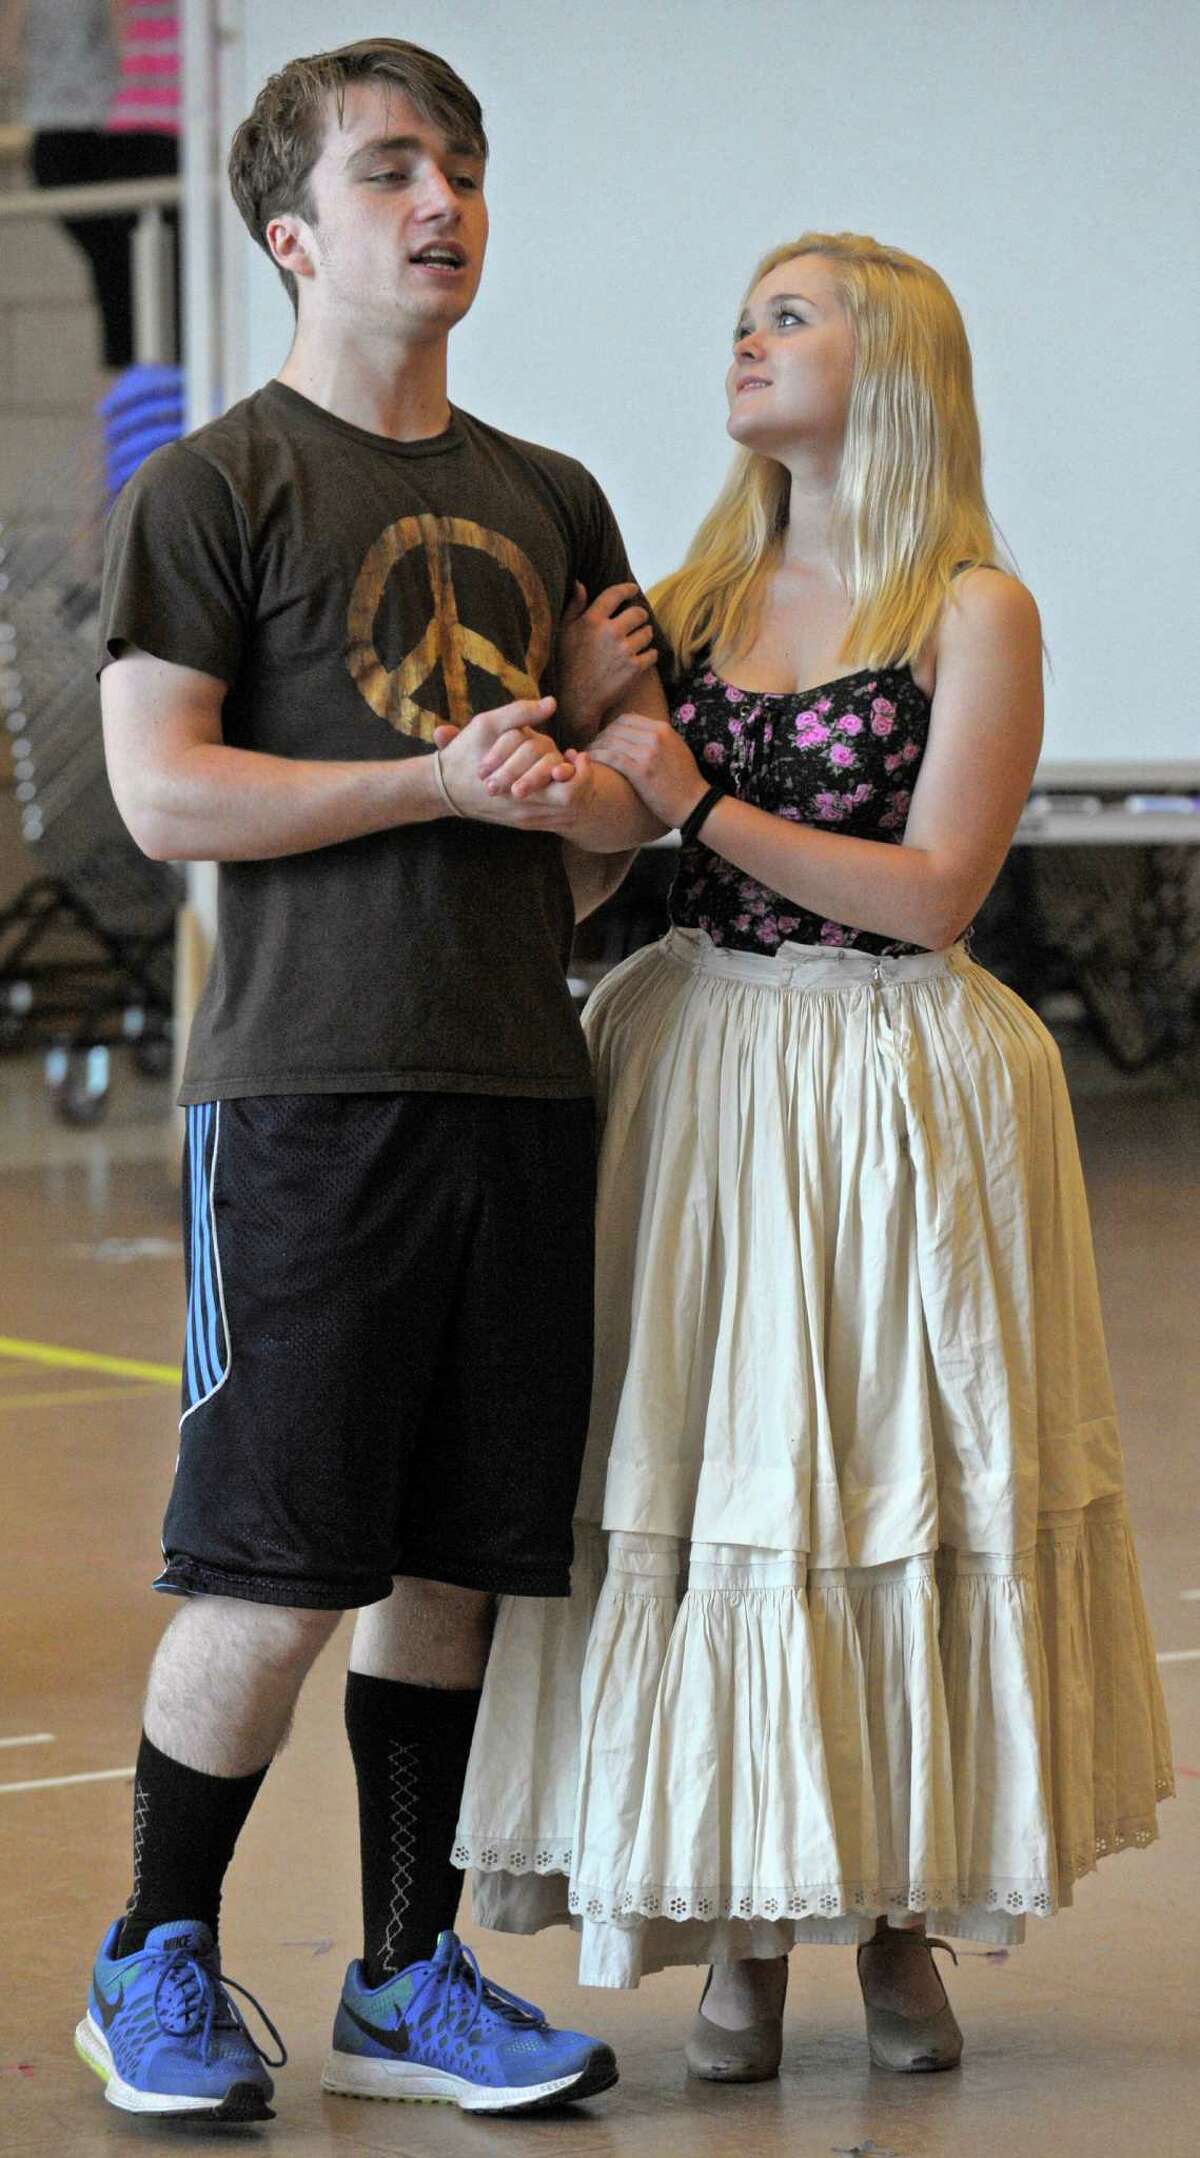 Cameron Bell and Brianna Bauch, of Newtown, during the rehearsal for the New Arts musical "Liberty Smith", on Thursday, July 23, 2015, in Newtown, Conn. The play will be at Newtown High School on Friday July 31, at 7 p.m., Saturday August 1, at 2 & 7 p.m. and Sunday, August 2, at 2 p.m. Bell plays "Liberty Smith" and Bauch is "Martha" in the musical.